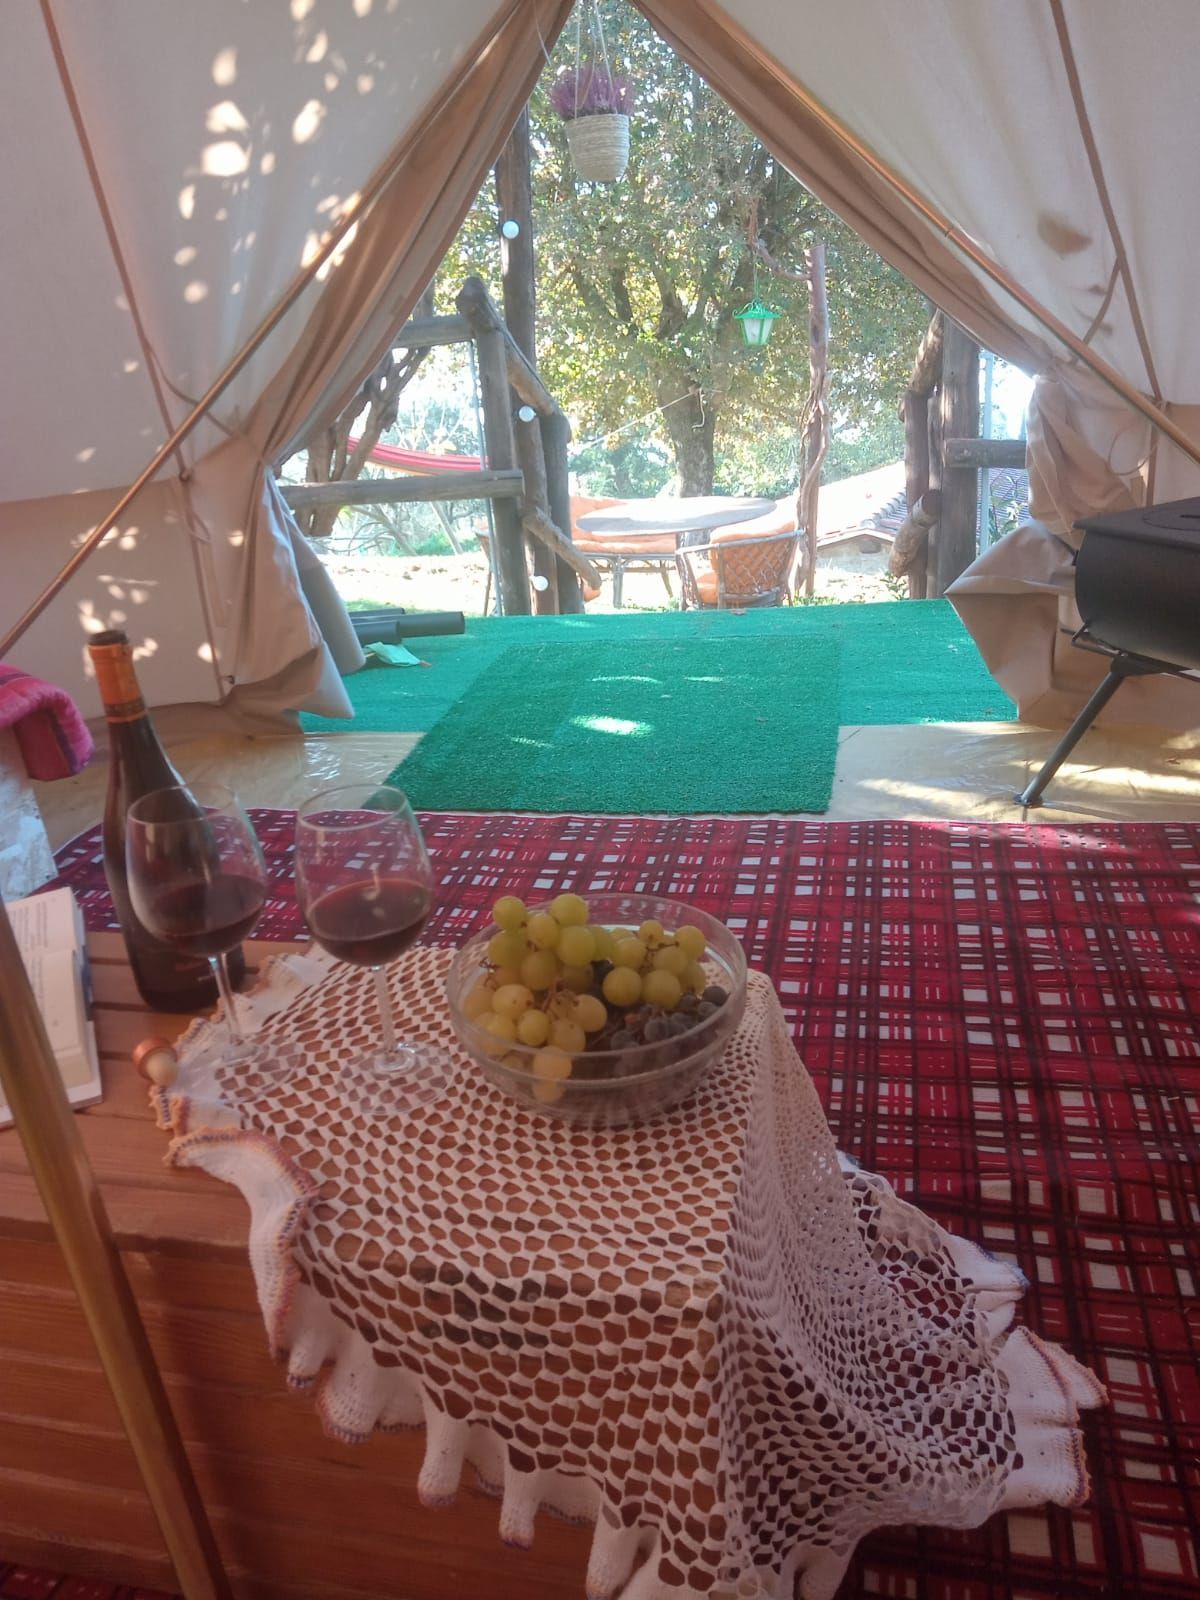 Glamping Bell Tent immerso nella Natura